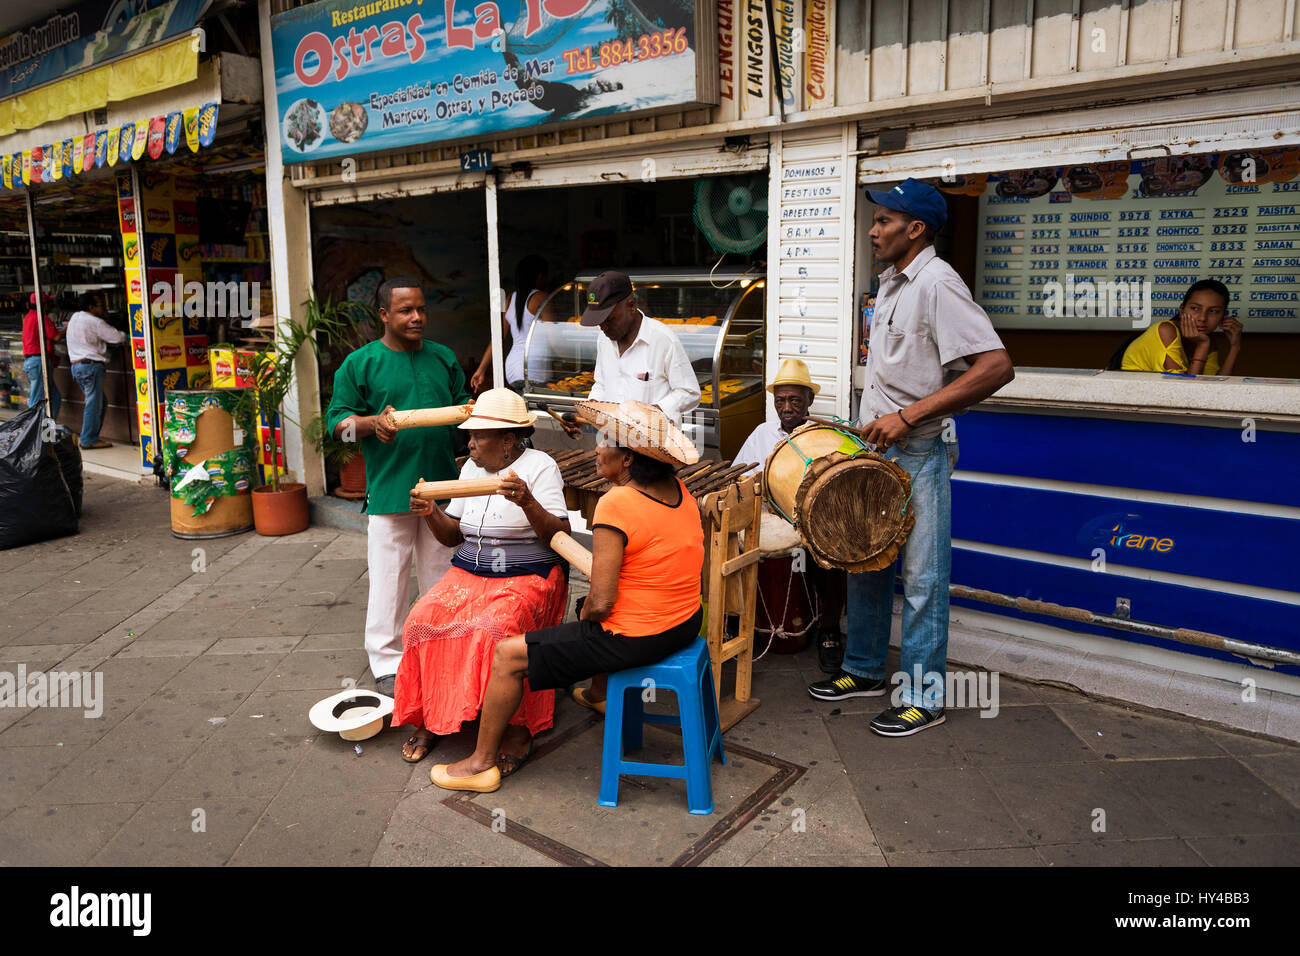 Cali, Colimbia - February 6, 2014: Street musicians playing in a street in the city of Cali, in Colombia Stock Photo